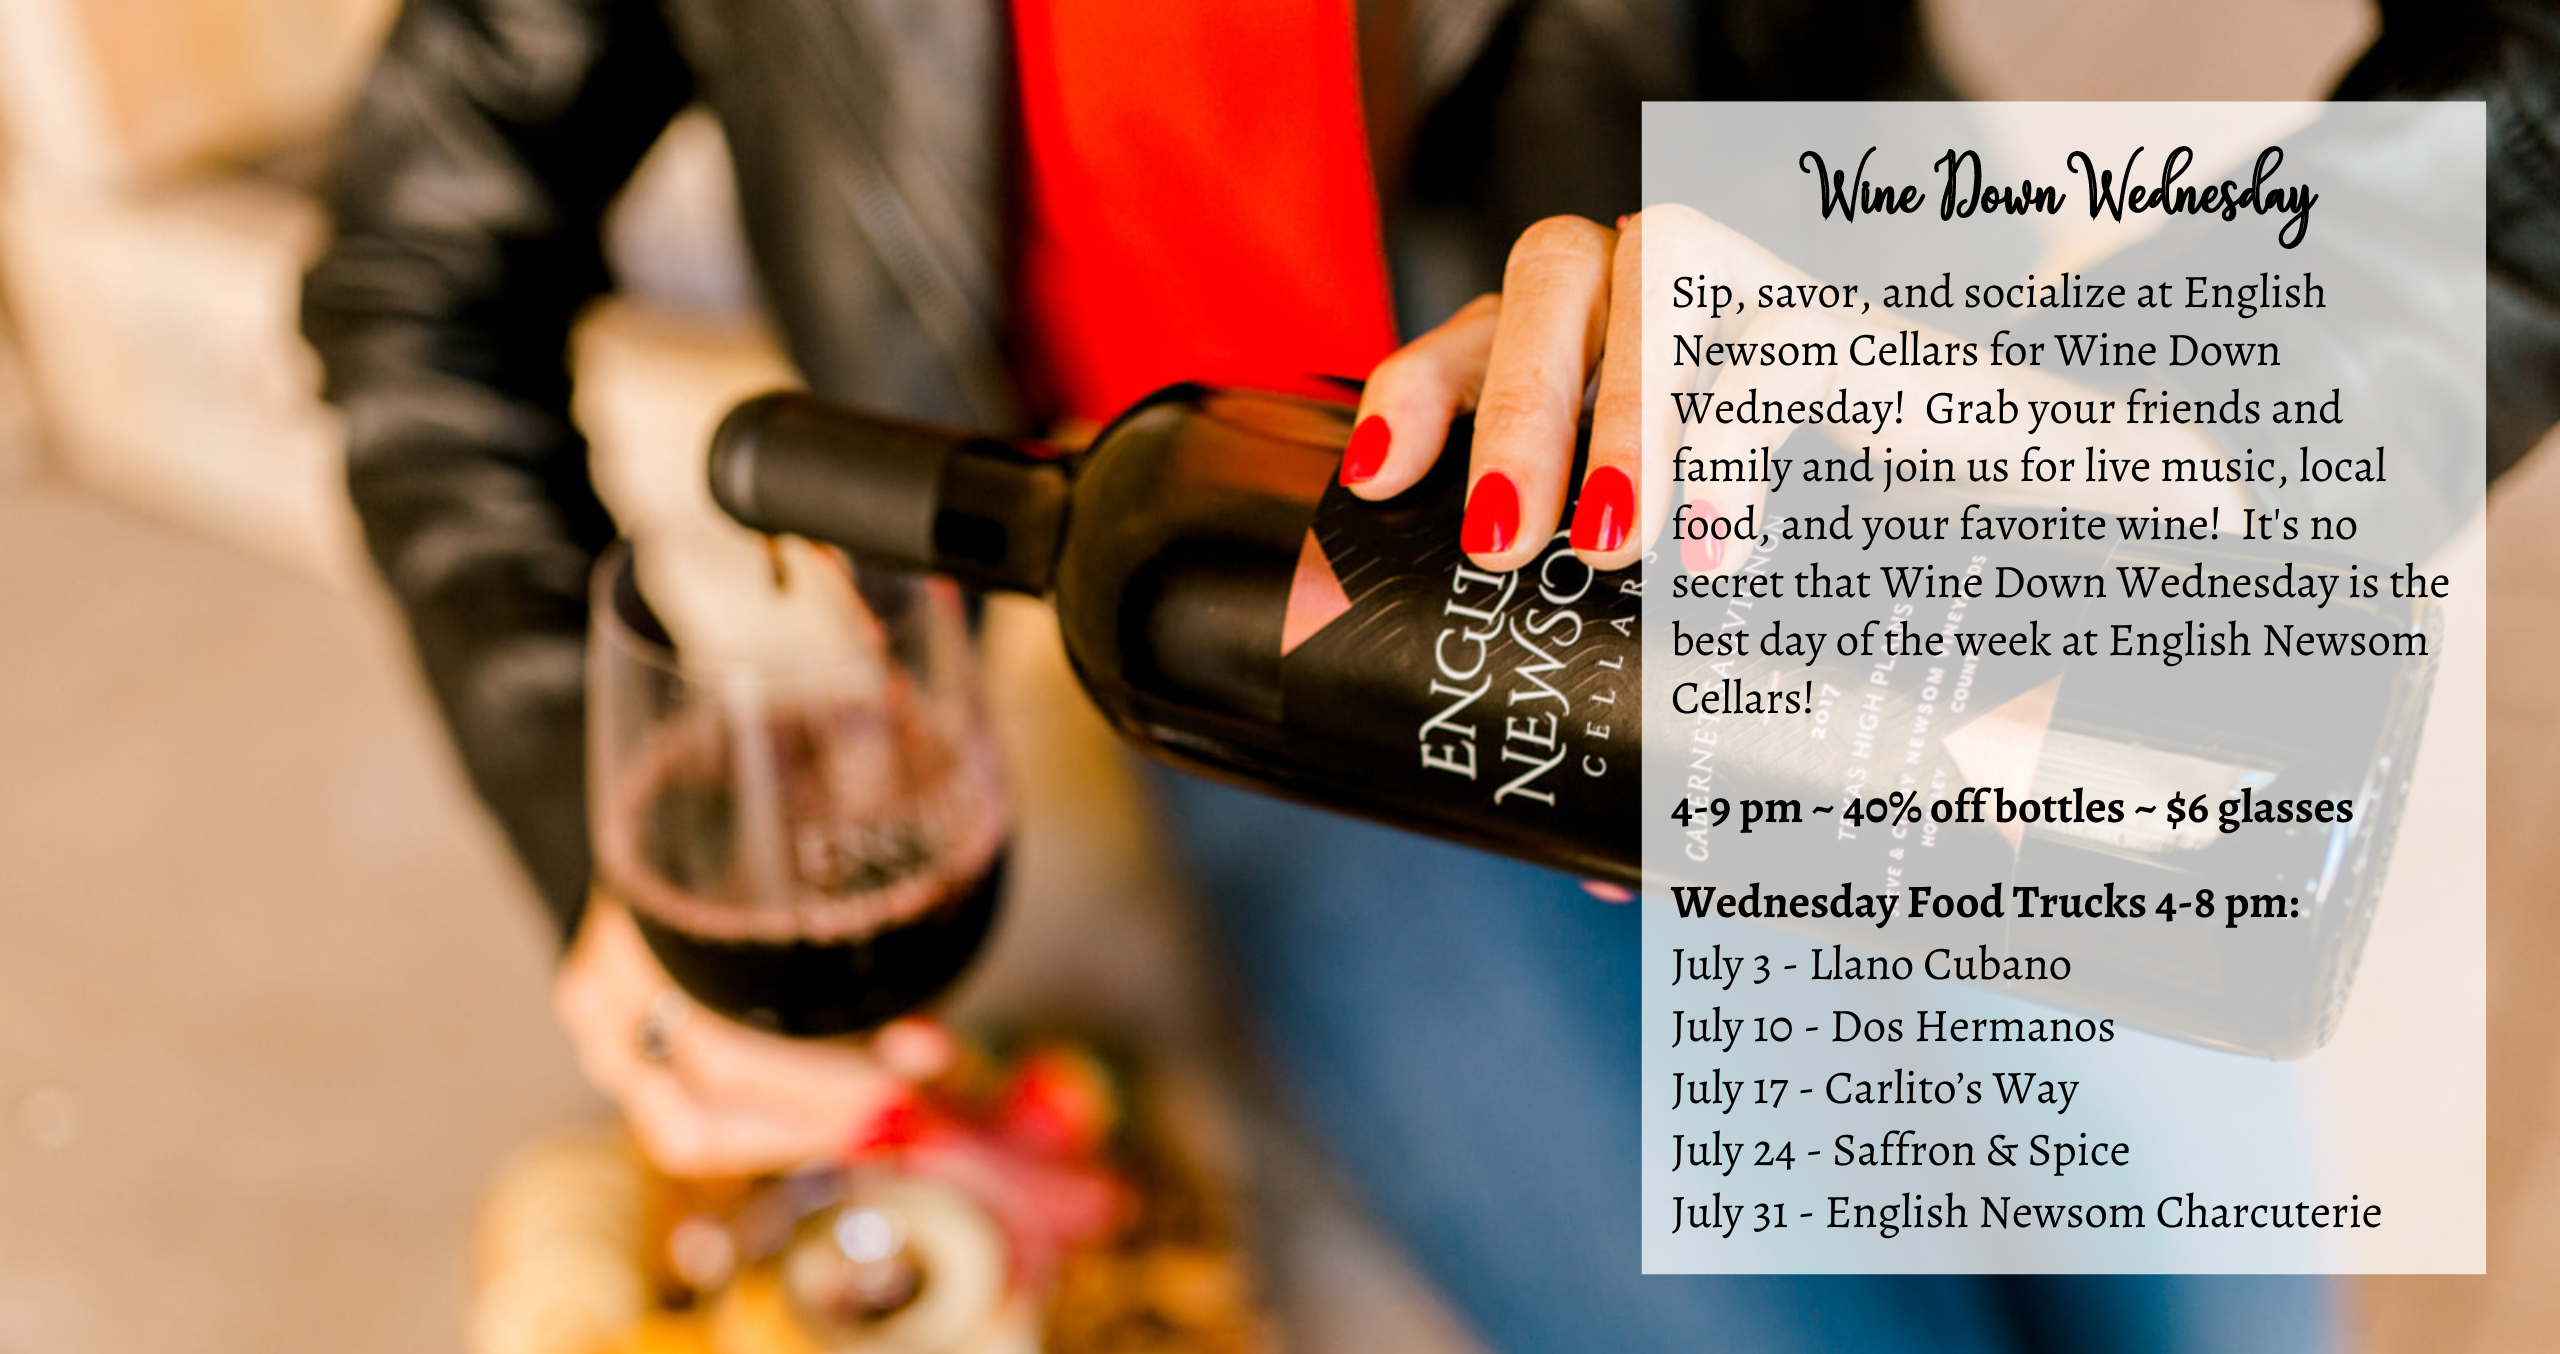 Sip, savor, and socialize at English Newsom Cellars for Wine Down Wednesday! Grab your friends and family and join us for live music, local food, and your favorite wine! It's no secret that Wine Down Wednesday is the best day of the week at English Newsom Cellars! 4-9 pm ~ 40% off bottles ~ $6 glasses Wednesday Food Trucks 4-8 pm: July 3 - Llano Cubano July 10 - Dos Hermanos July 17 - Carlito’s Way July 24 - Saffron & Spice July 31 - English Newsom Charcuterie